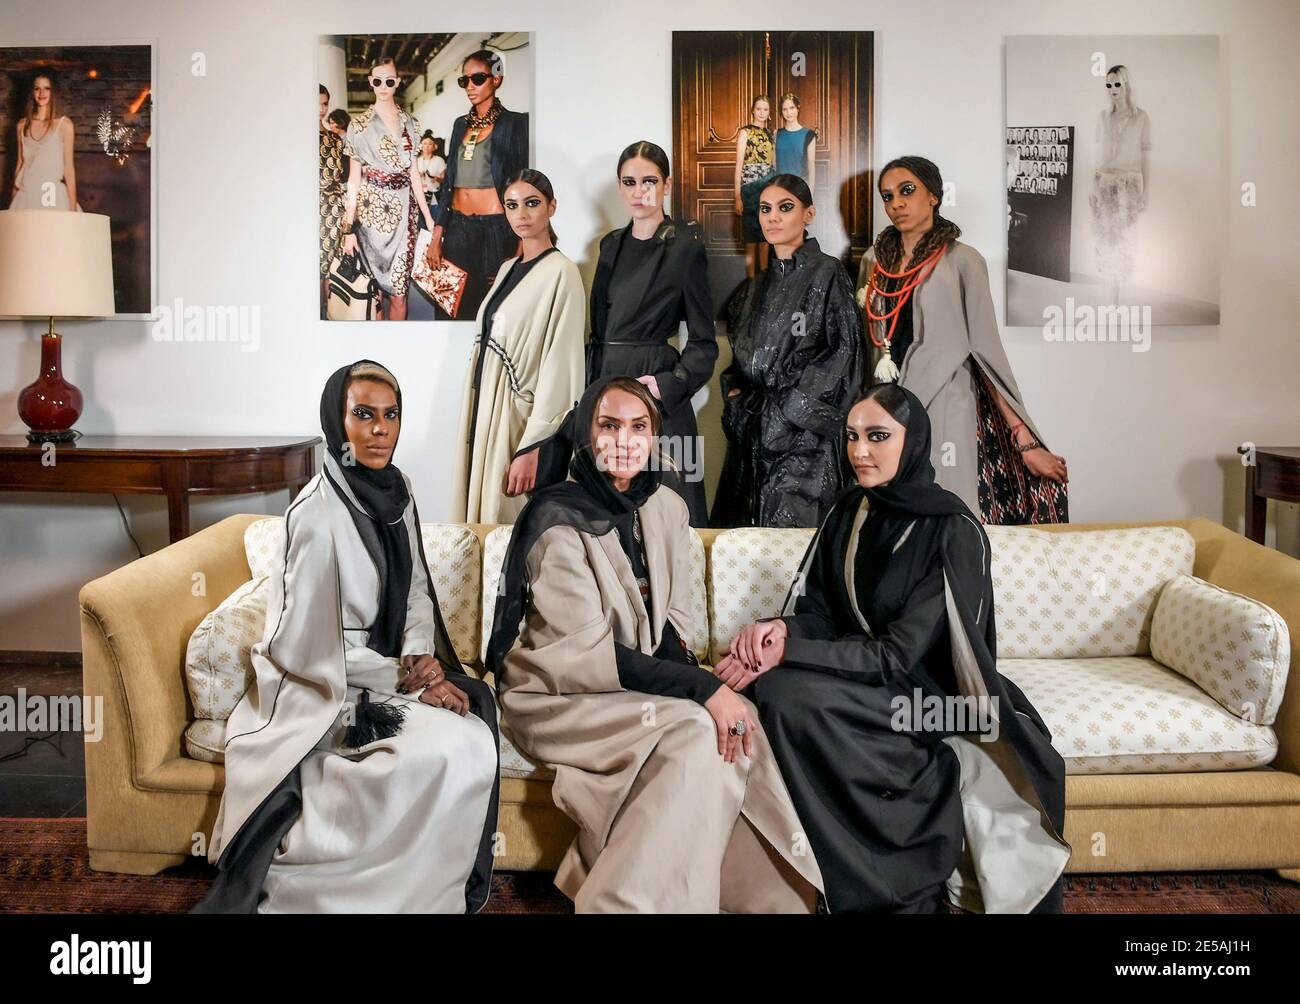 Saudi fashion designer Princess Safia Hussein Guerras (center) sits next to her daughter Princess Hannah Al-Faisal (right) and other models after the collection presentation, in a show called ‘Khaleeki Chic’ (or ’Stay Chic’), at the Belgian Embassy in Riyadh, Saudi Arabia, on January 23, 2021. Photo by Basheer Saleh/Arab News/ABACAPRESS.COM Stock Photo